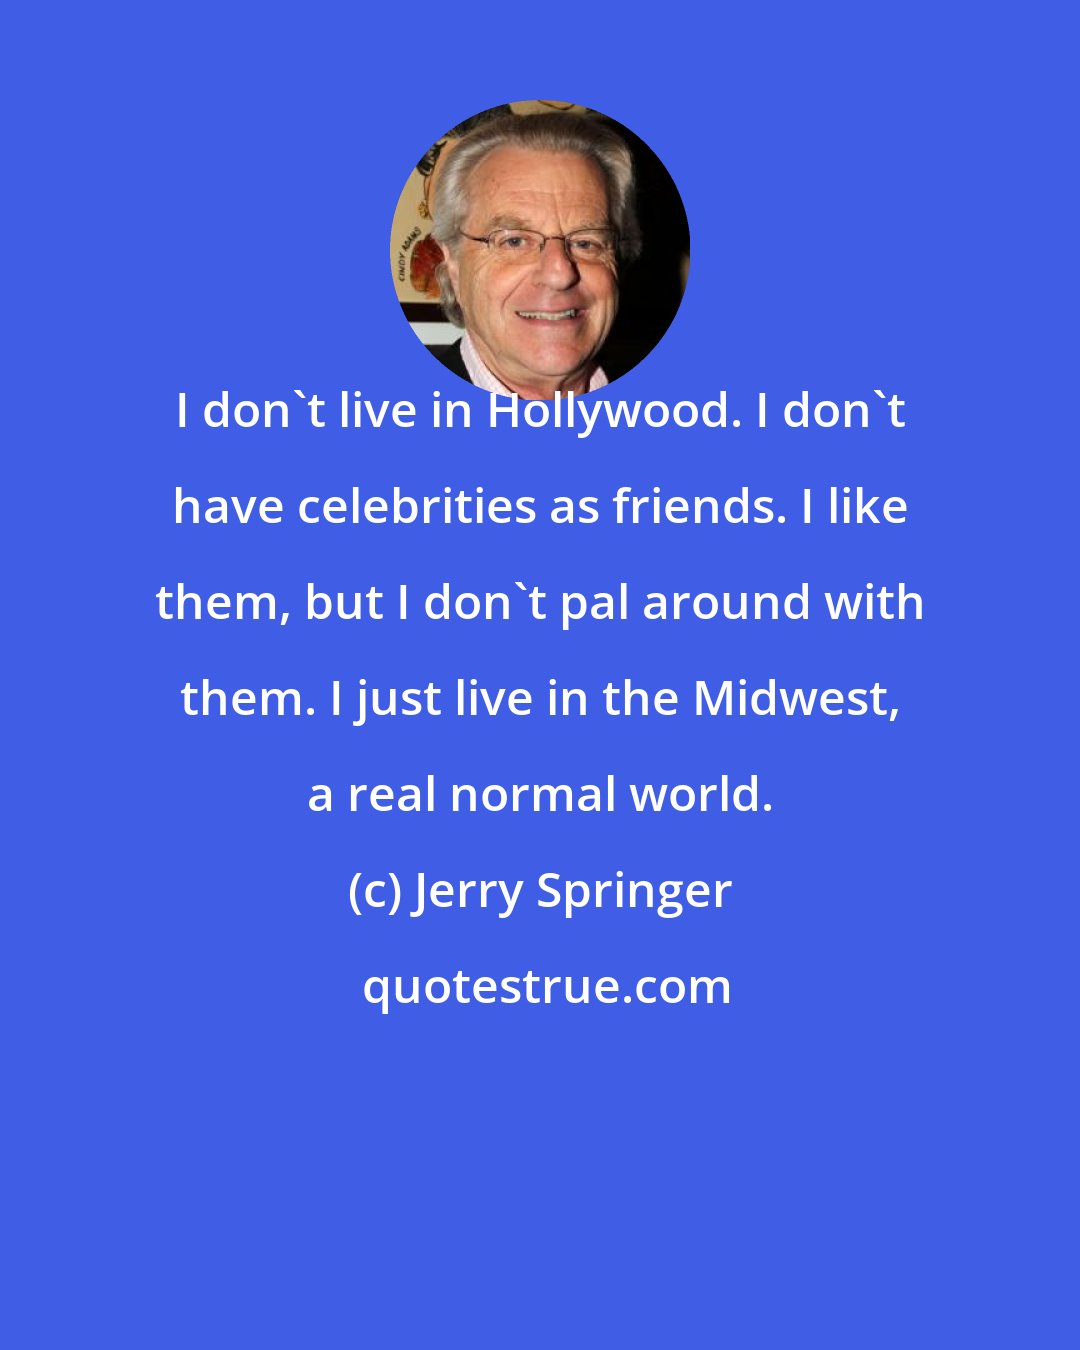 Jerry Springer: I don't live in Hollywood. I don't have celebrities as friends. I like them, but I don't pal around with them. I just live in the Midwest, a real normal world.